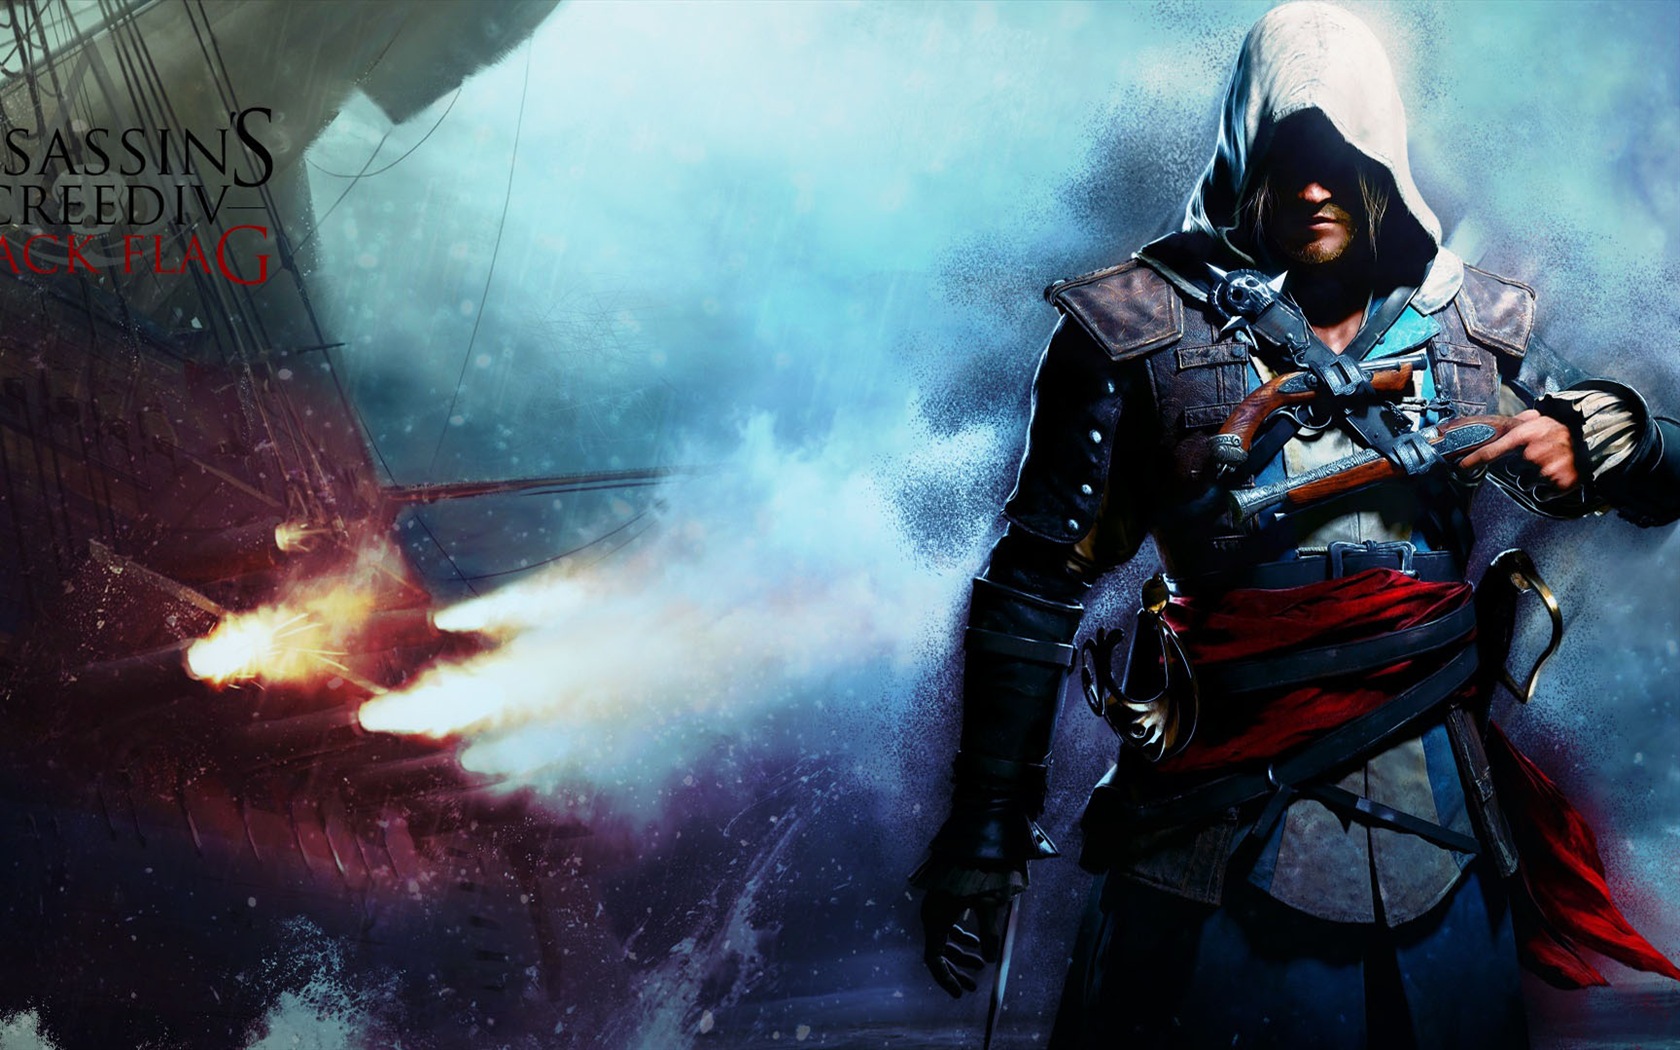 Creed IV Assassin: Black Flag HD wallpapers #2 - 1680x1050